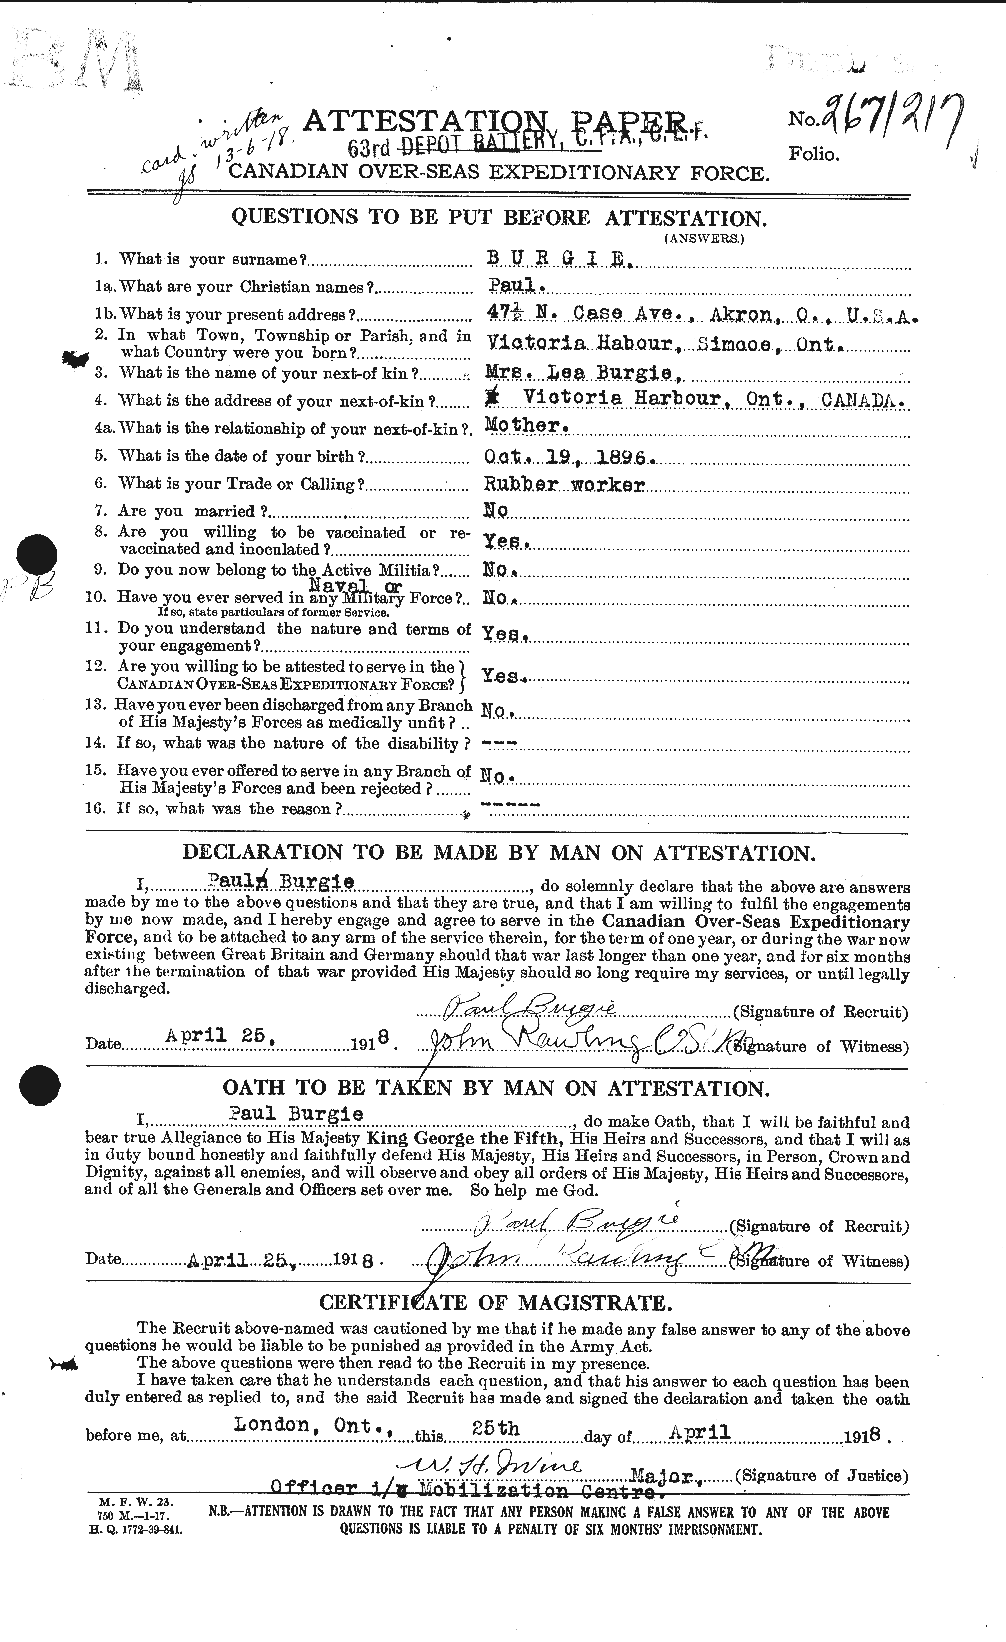 Personnel Records of the First World War - CEF 272266a